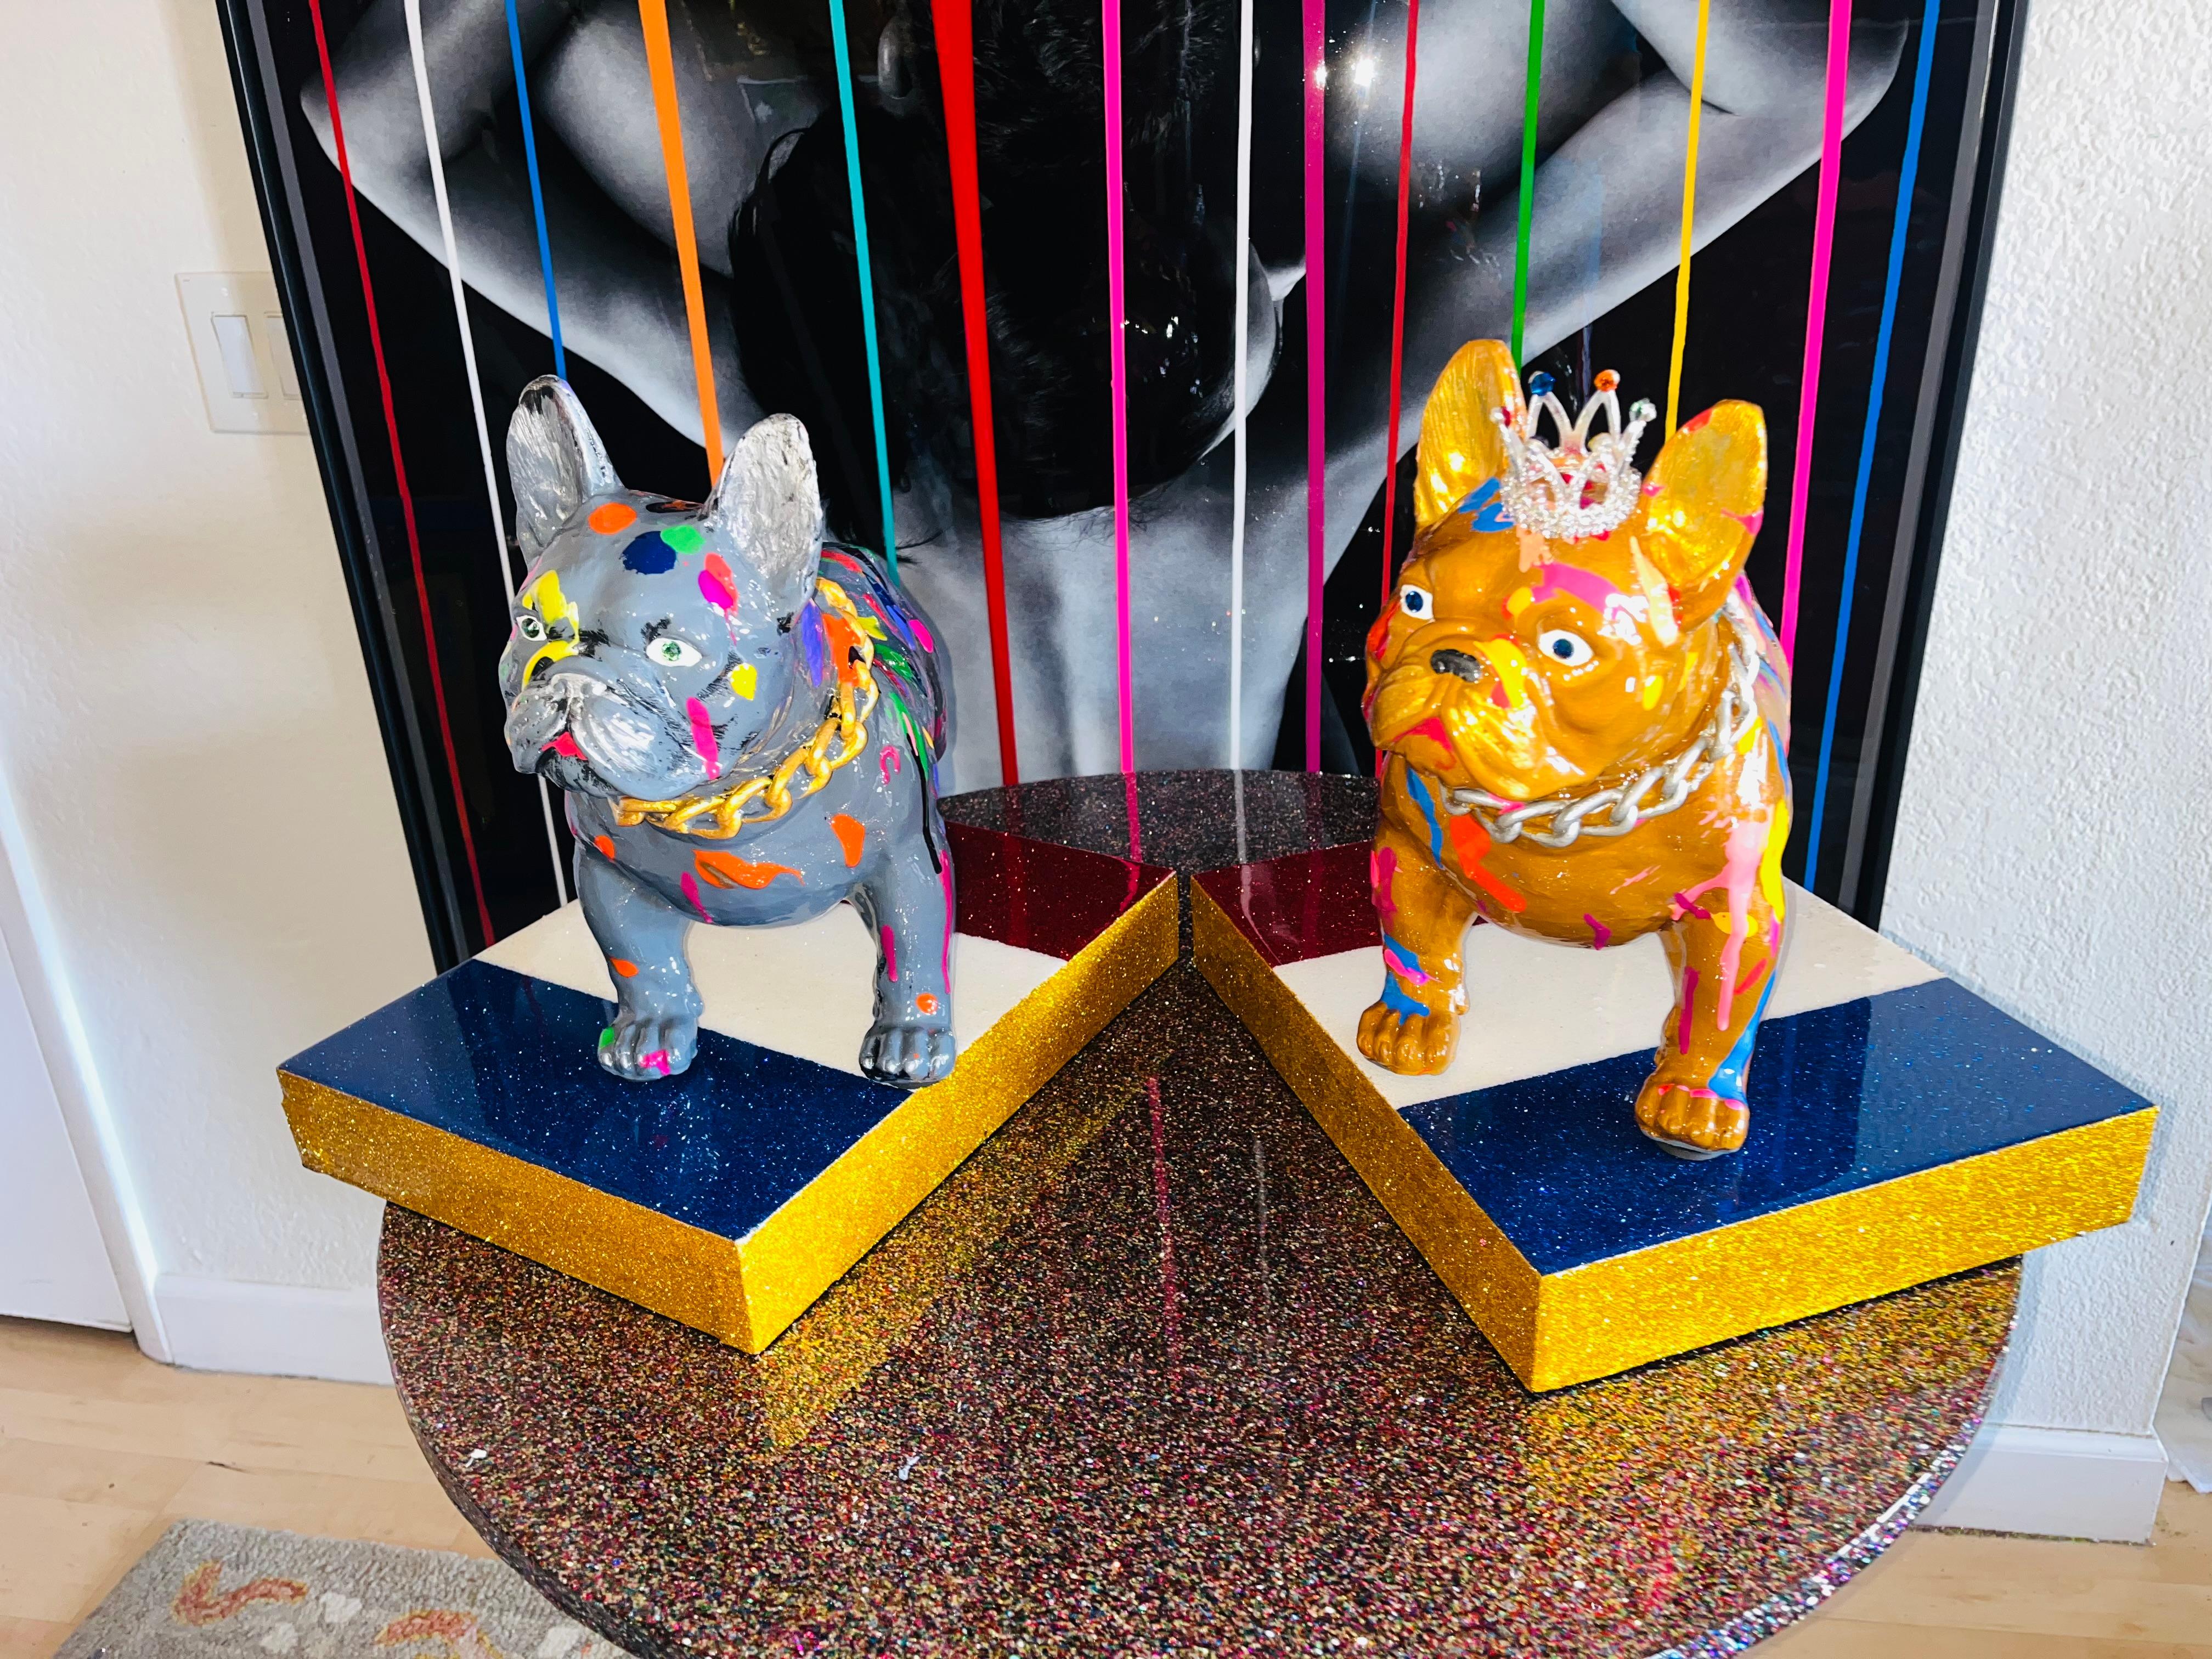 FREN AND CHIE: The Badass Gangstar Couple Of South Of France. - Pop Art Sculpture by Mauro Oliveira